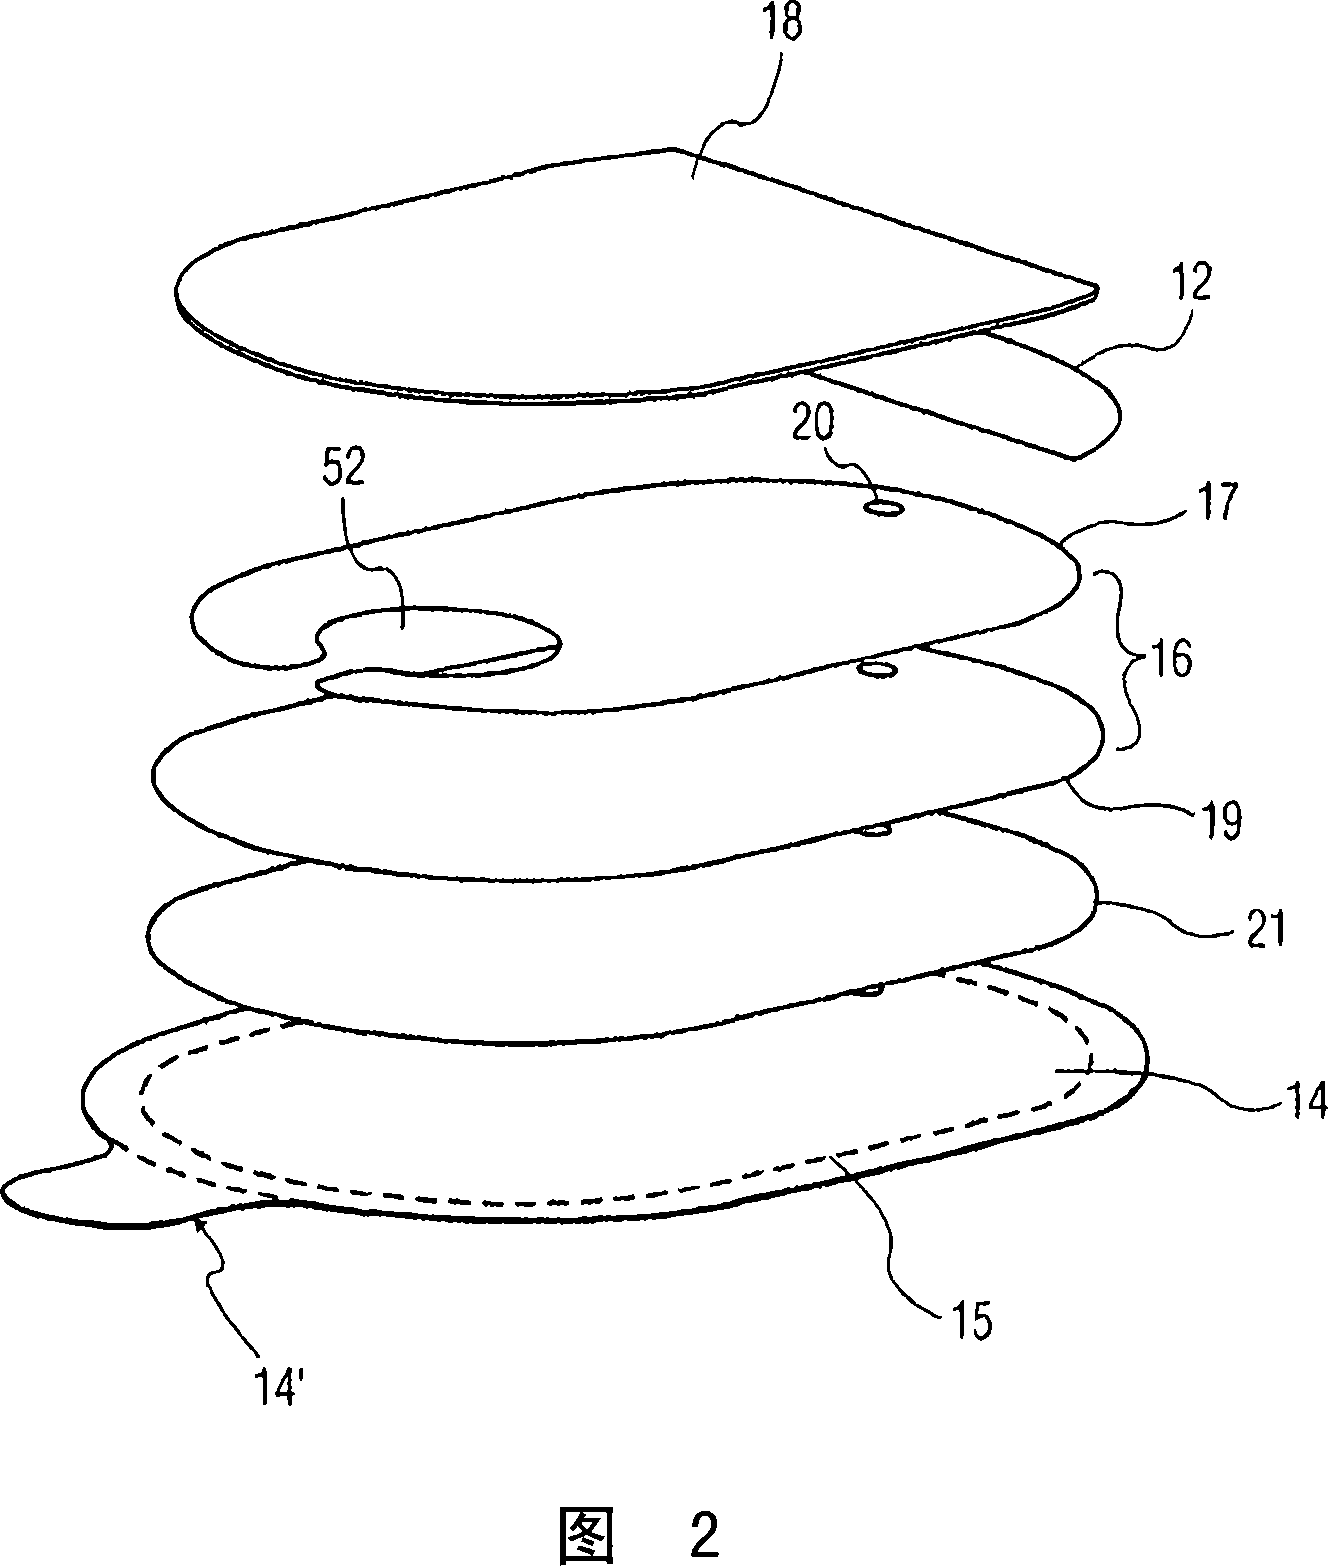 Electrode and enclosure for cardiac monitoring and treatment